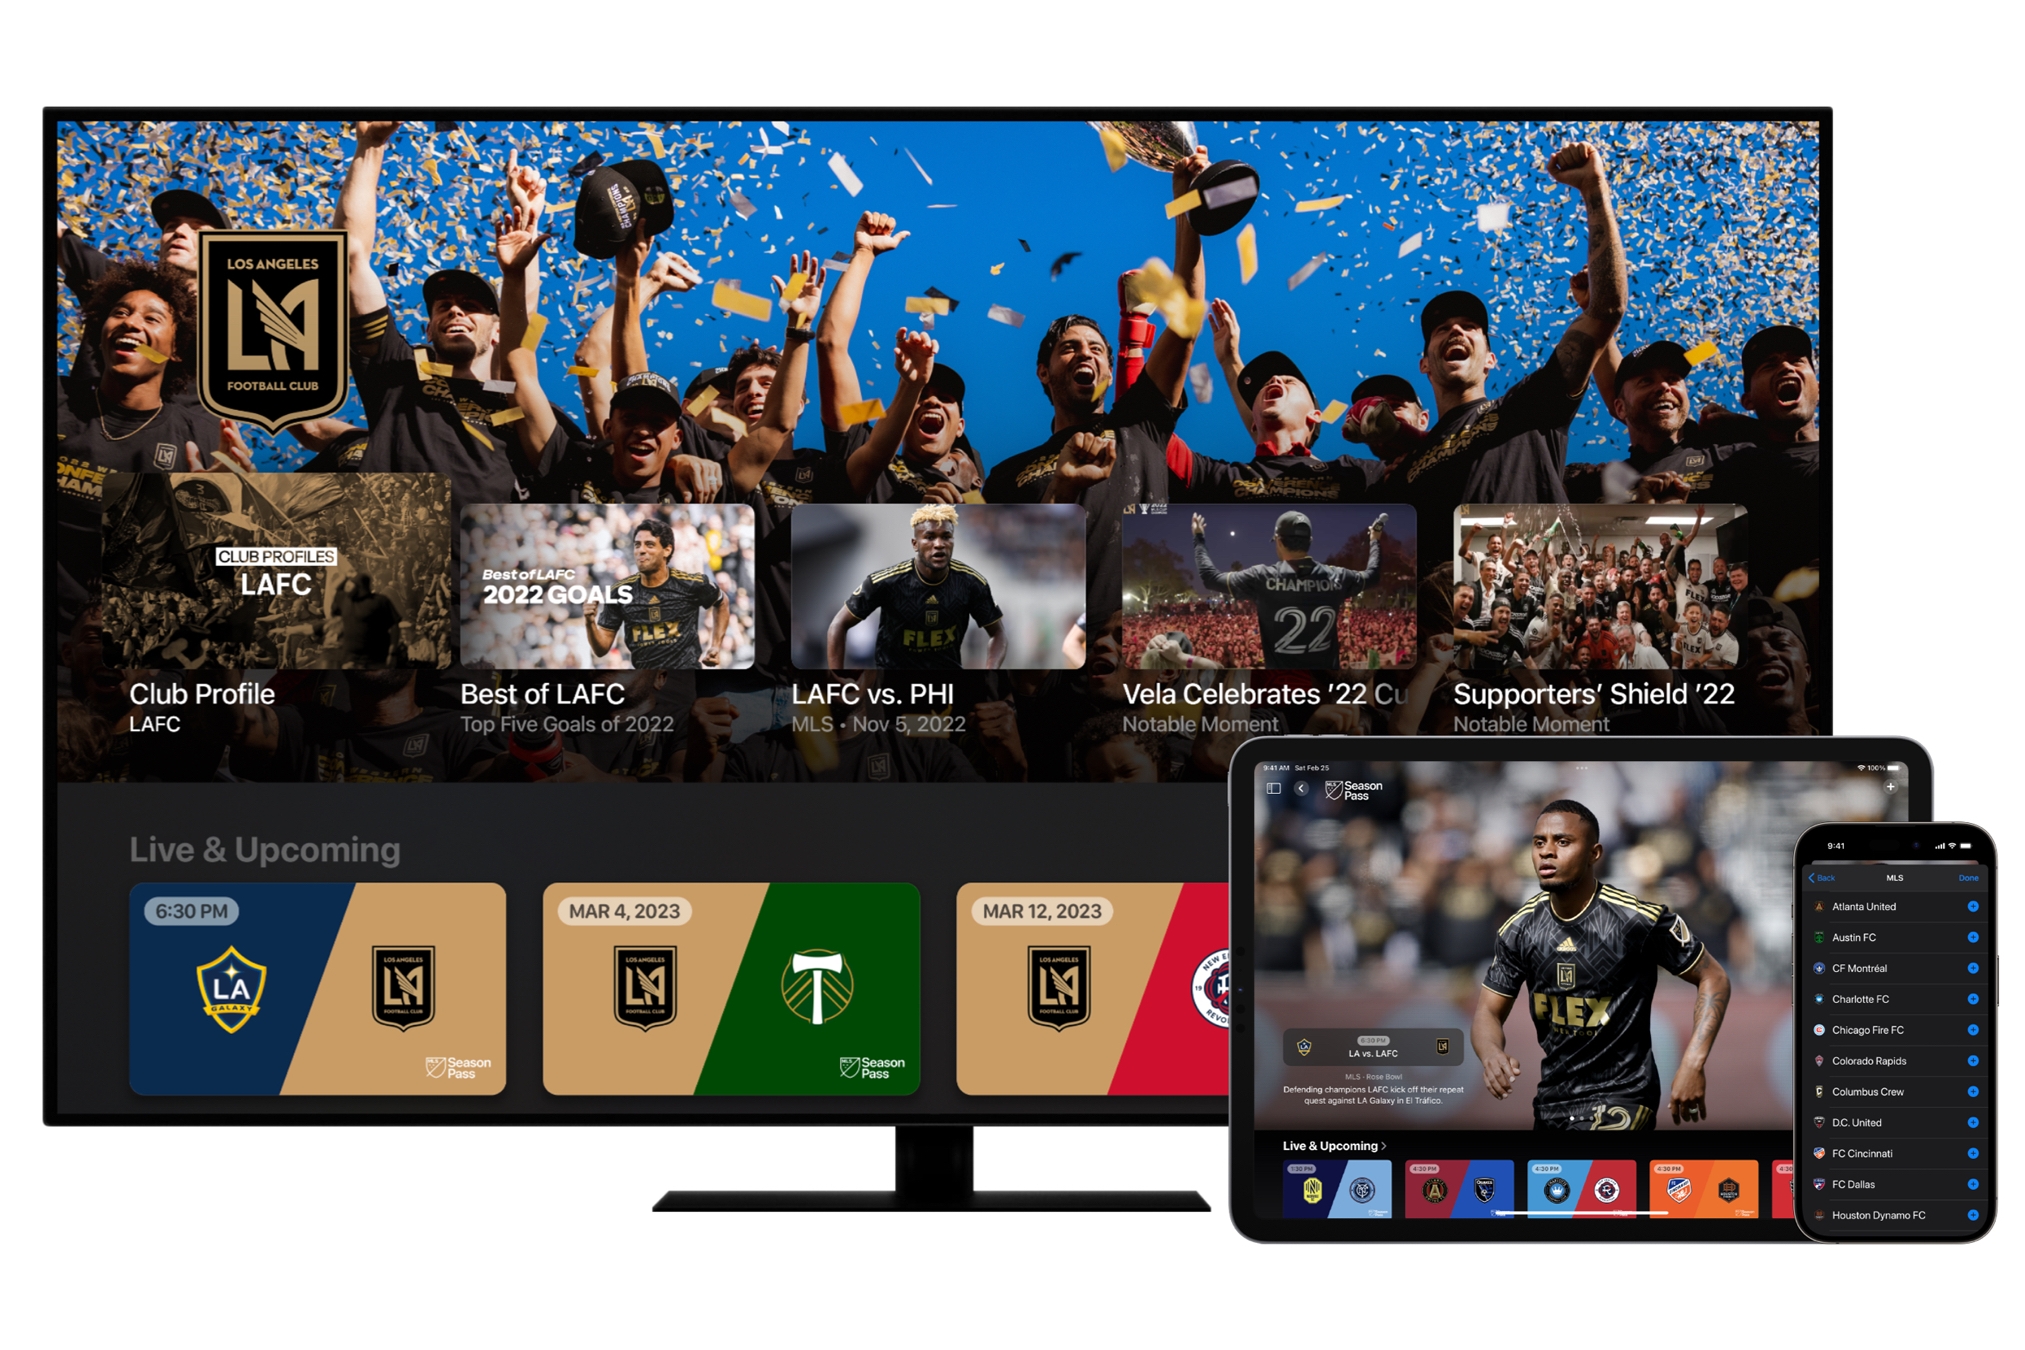 Apple MLS Season Pass live streaming: does Apple want from Major League Soccer?